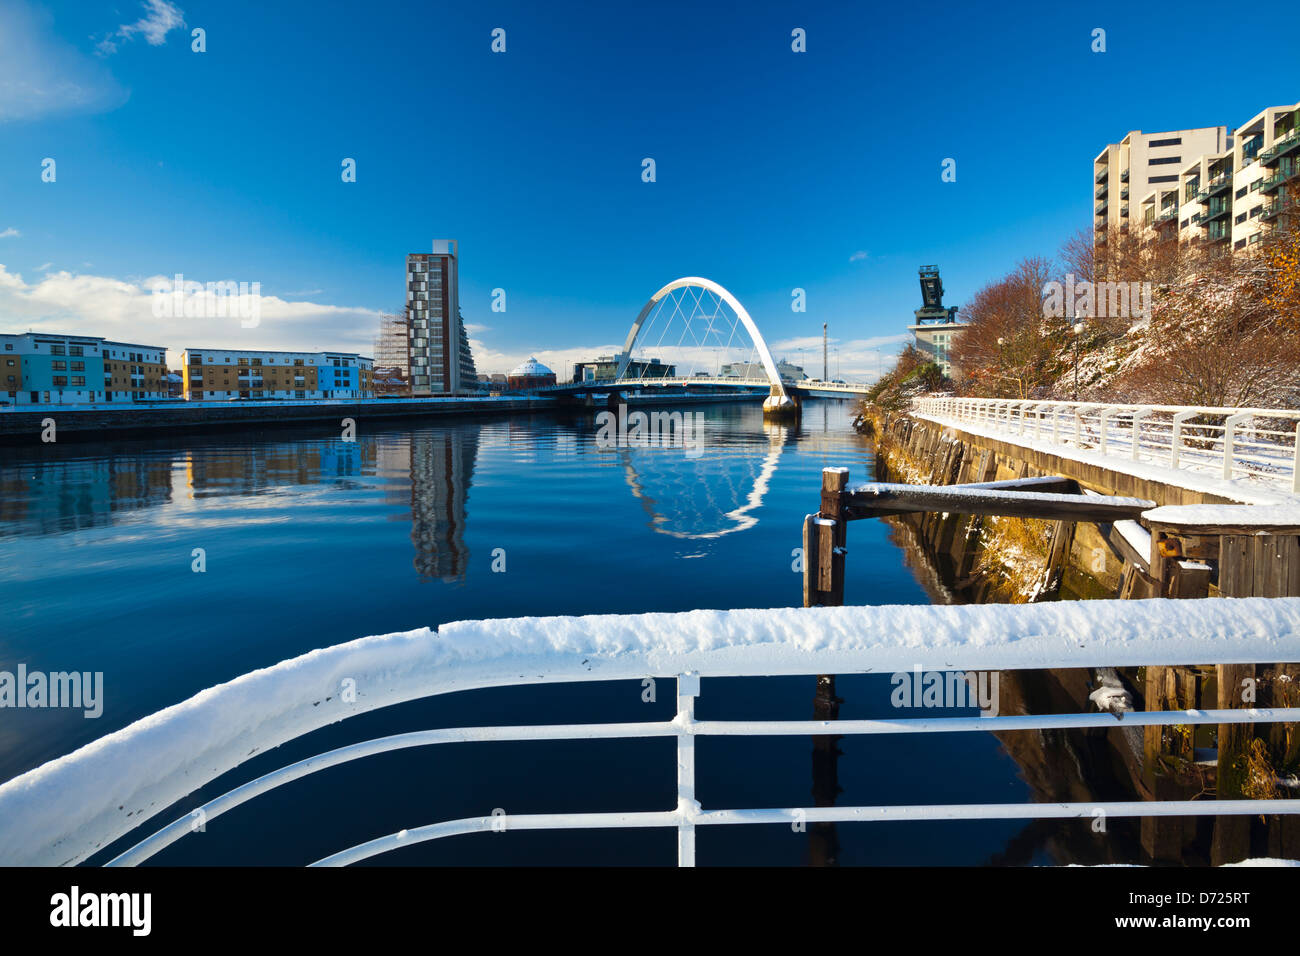 Scotland, Glasgow, Glasgow City. Glasgow's Clyde Arc bridge. More commonly known as the Squinty Bridge, and the Clyde Quayside redevelopment area. Stock Photo